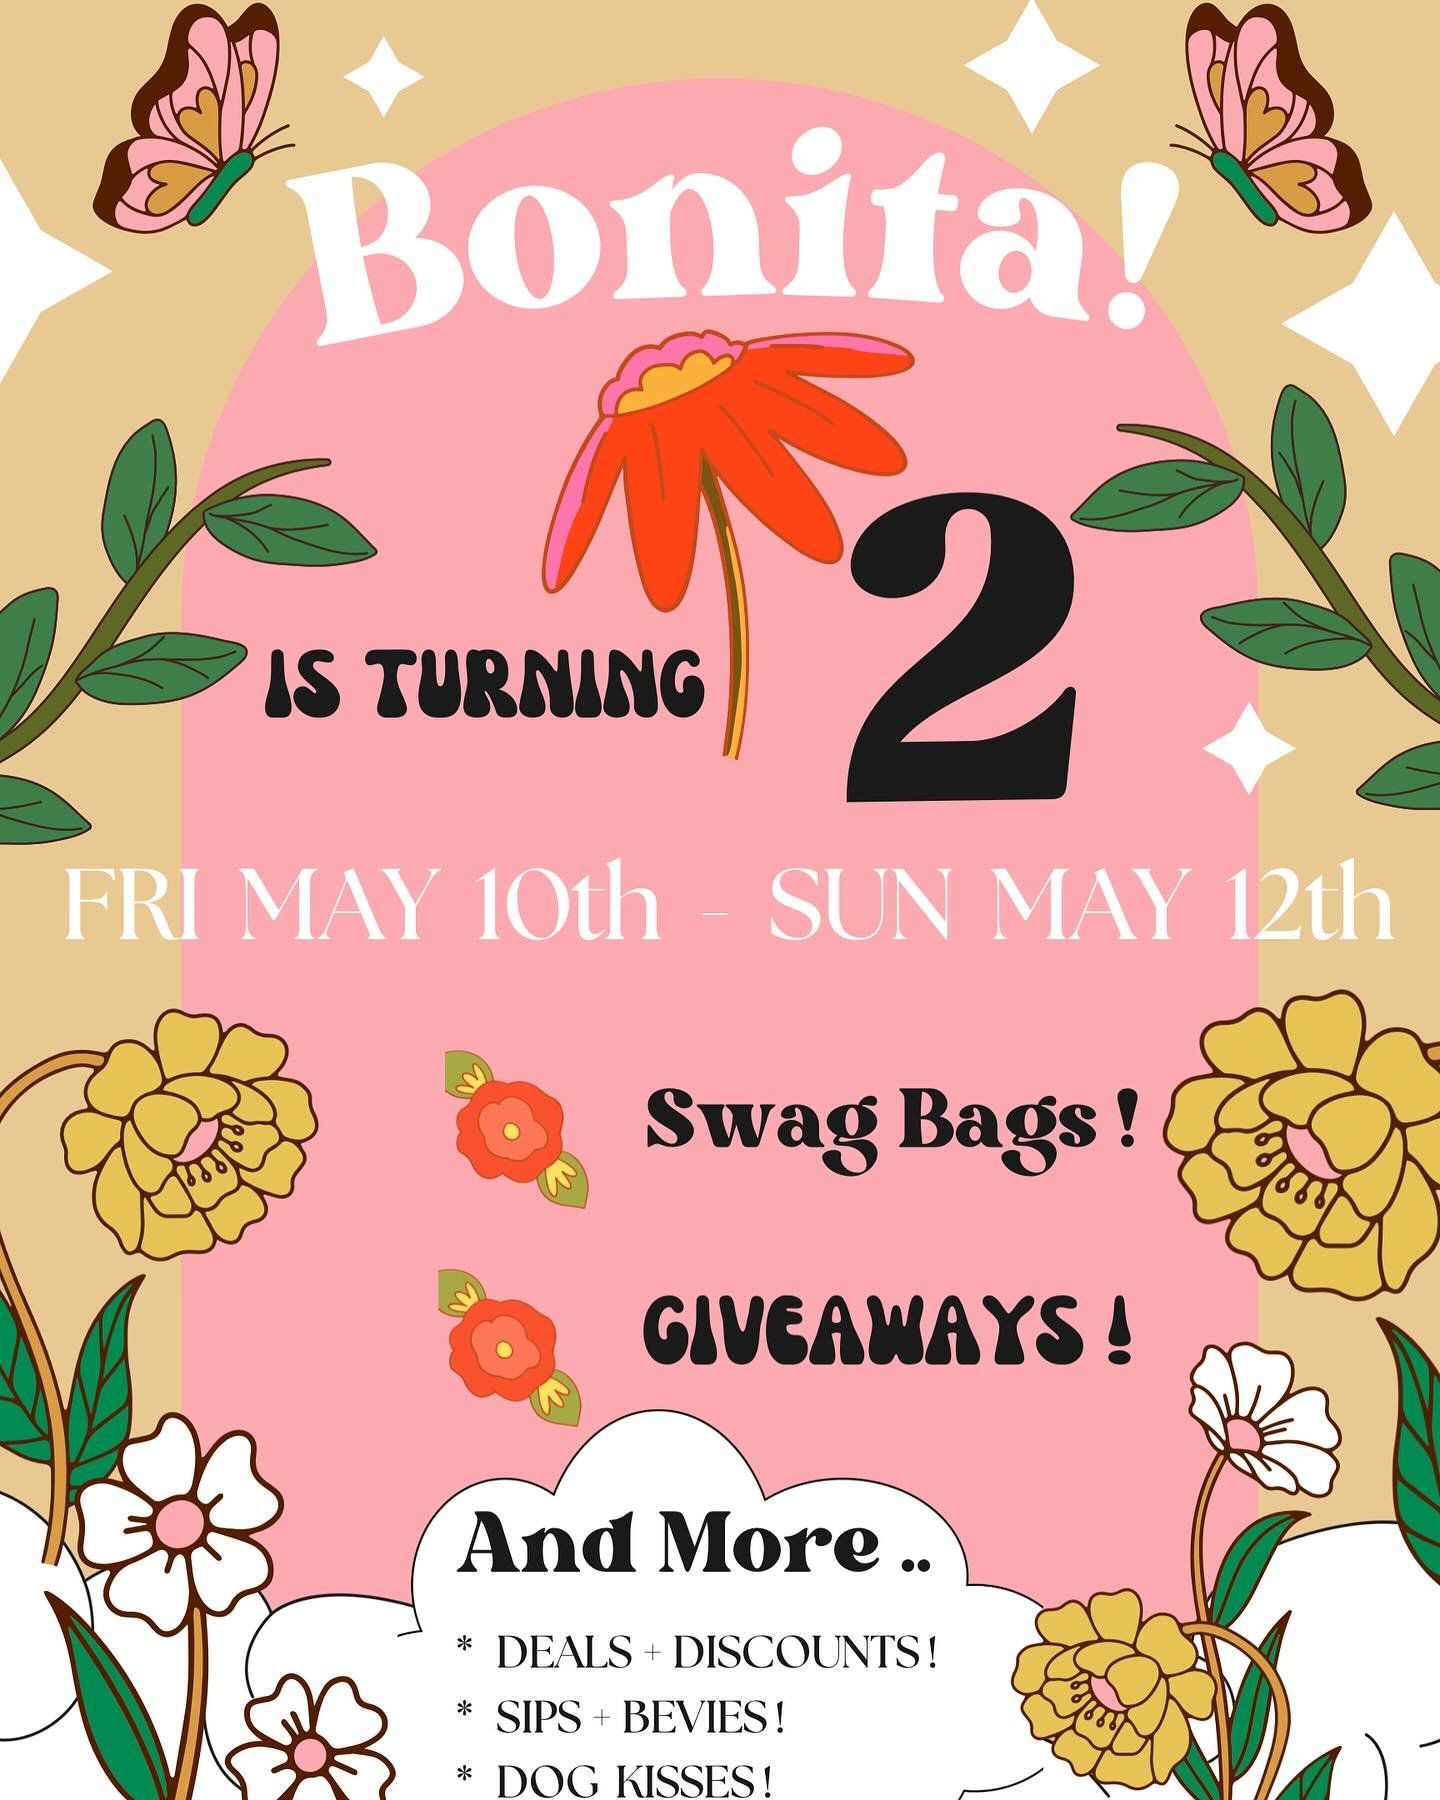 GAH! We&rsquo;re turning 2 🫣✨💫 and we want YOU to come CELEBRATE with us all weekend long 🎉

🔆 Next FRI 5/10 SAT 5/11 SUN 5/12 🔆

Here&rsquo;s what we&rsquo;ve got in store for y&rsquo;all 👇

&bull; $400 GIVEAWAY BASKET (no purchase needed to e